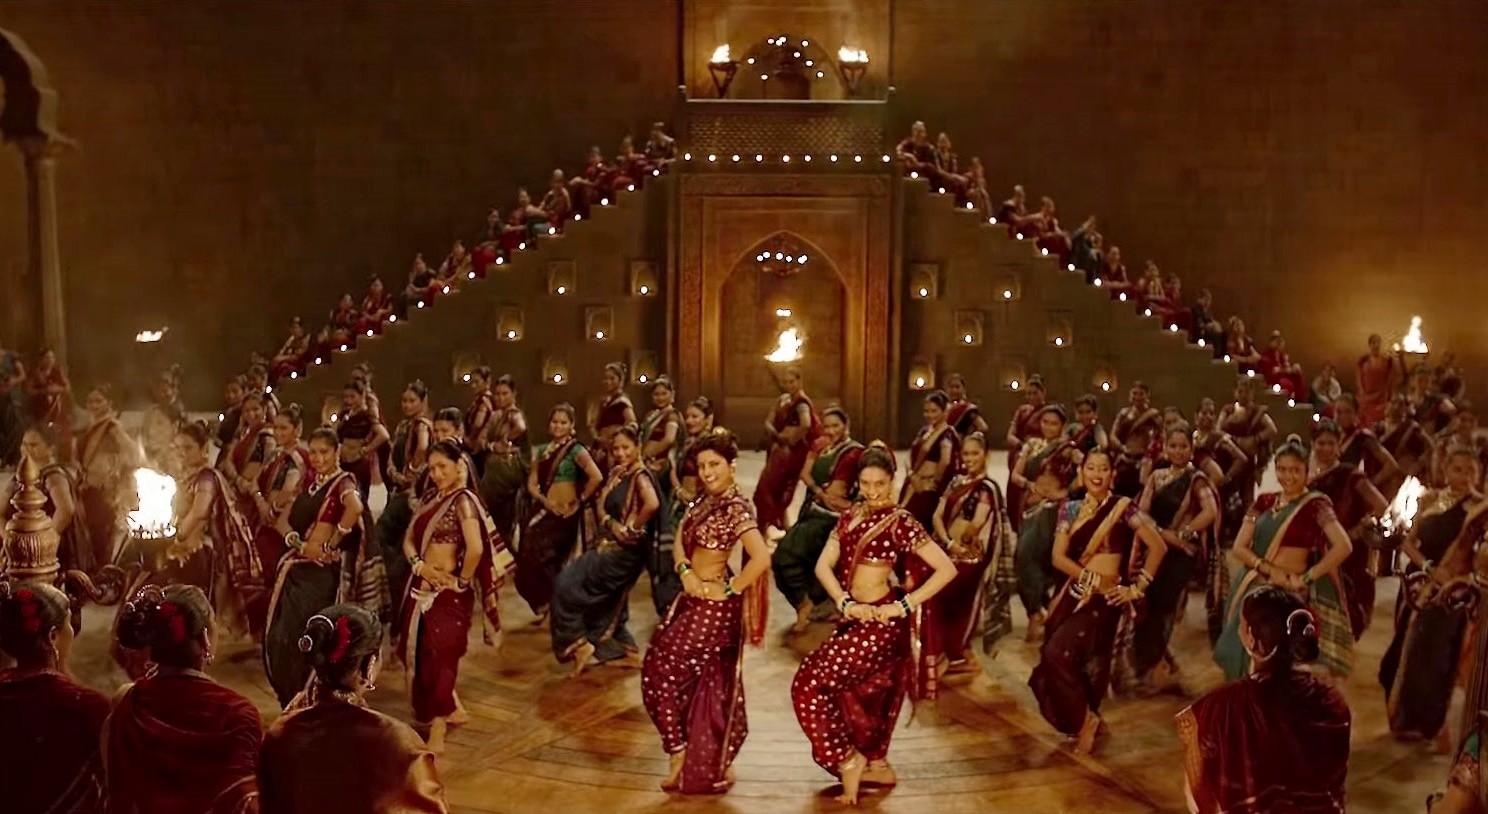 Bajirao Mastani (2015) Pictures, Trailer, Reviews, News, DVD and Soundtrack